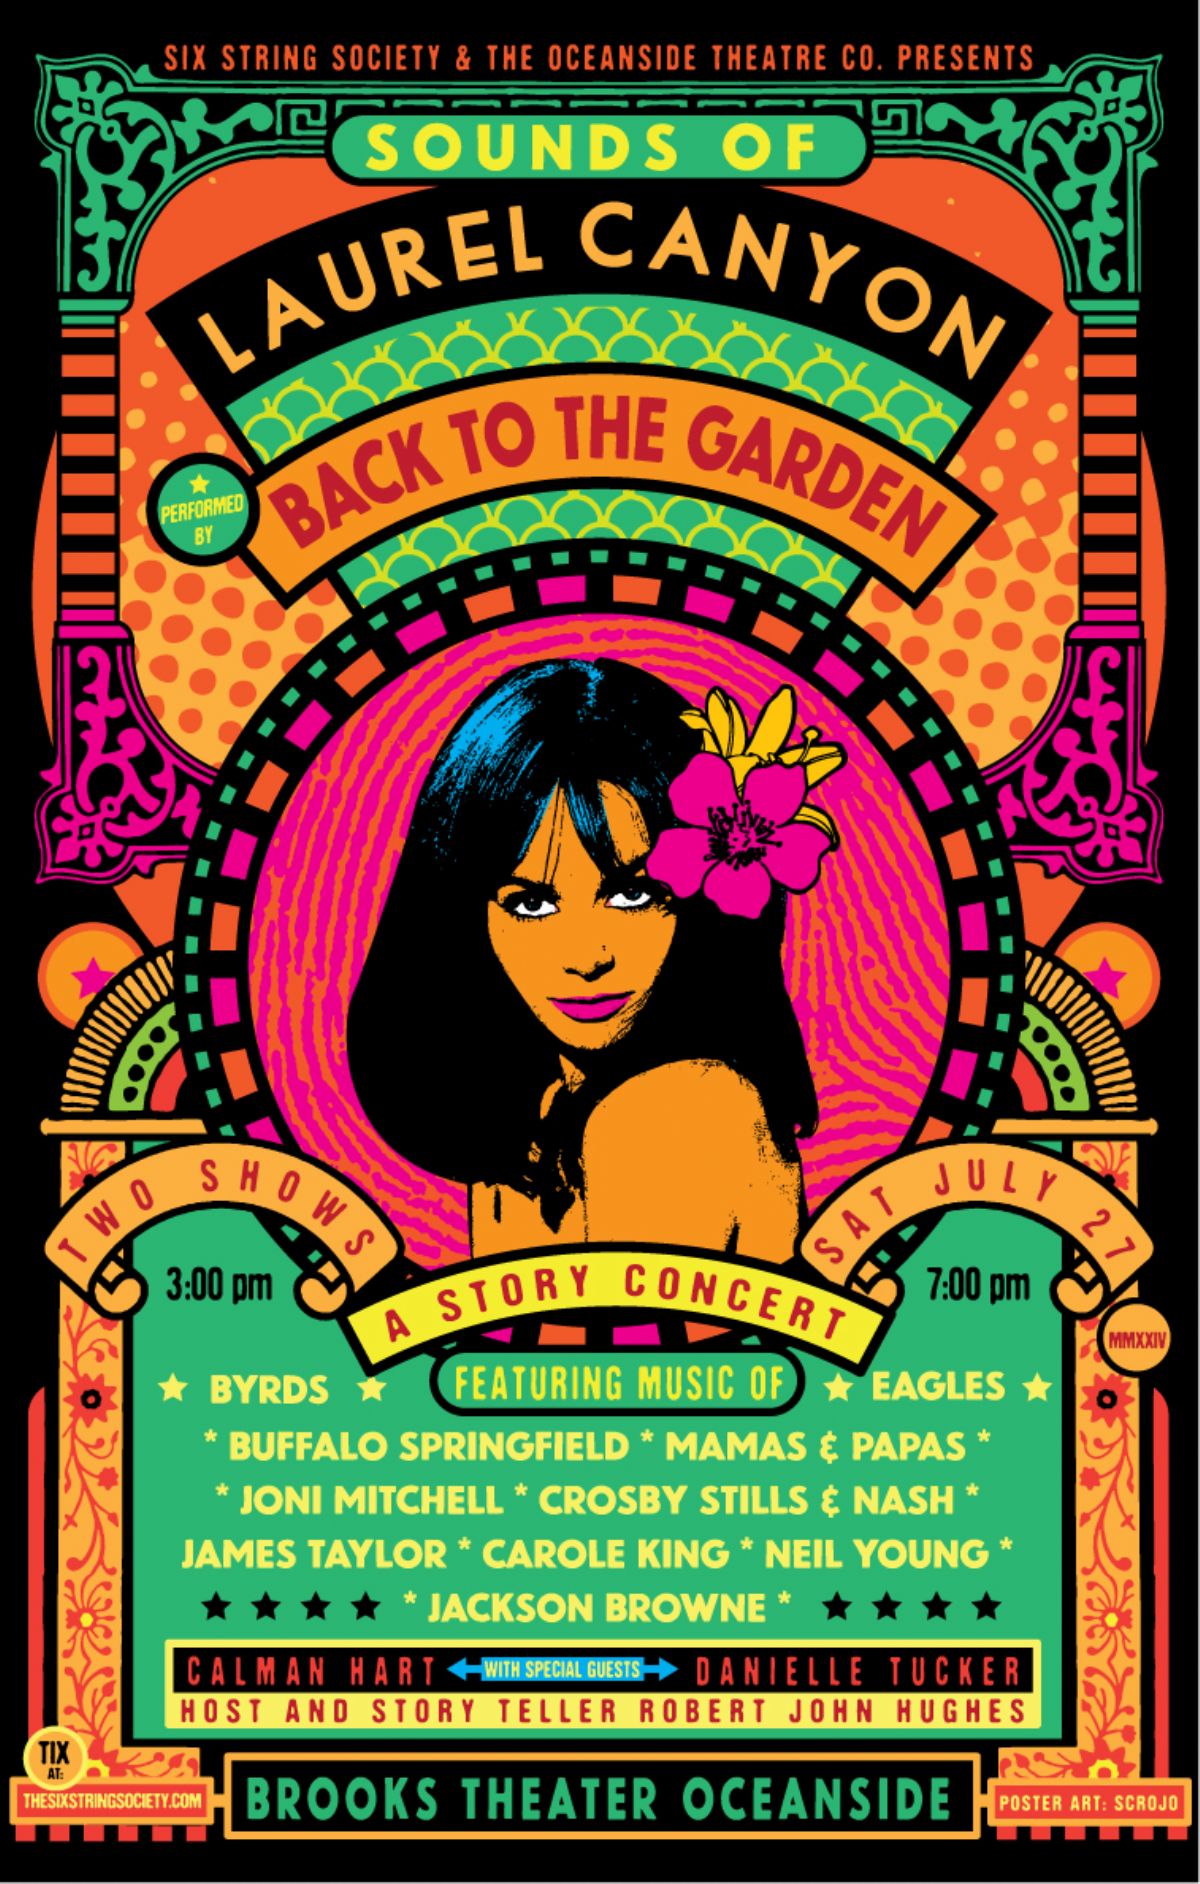 Sounds of Laurel Canyon - A Back to the Garden Story concert